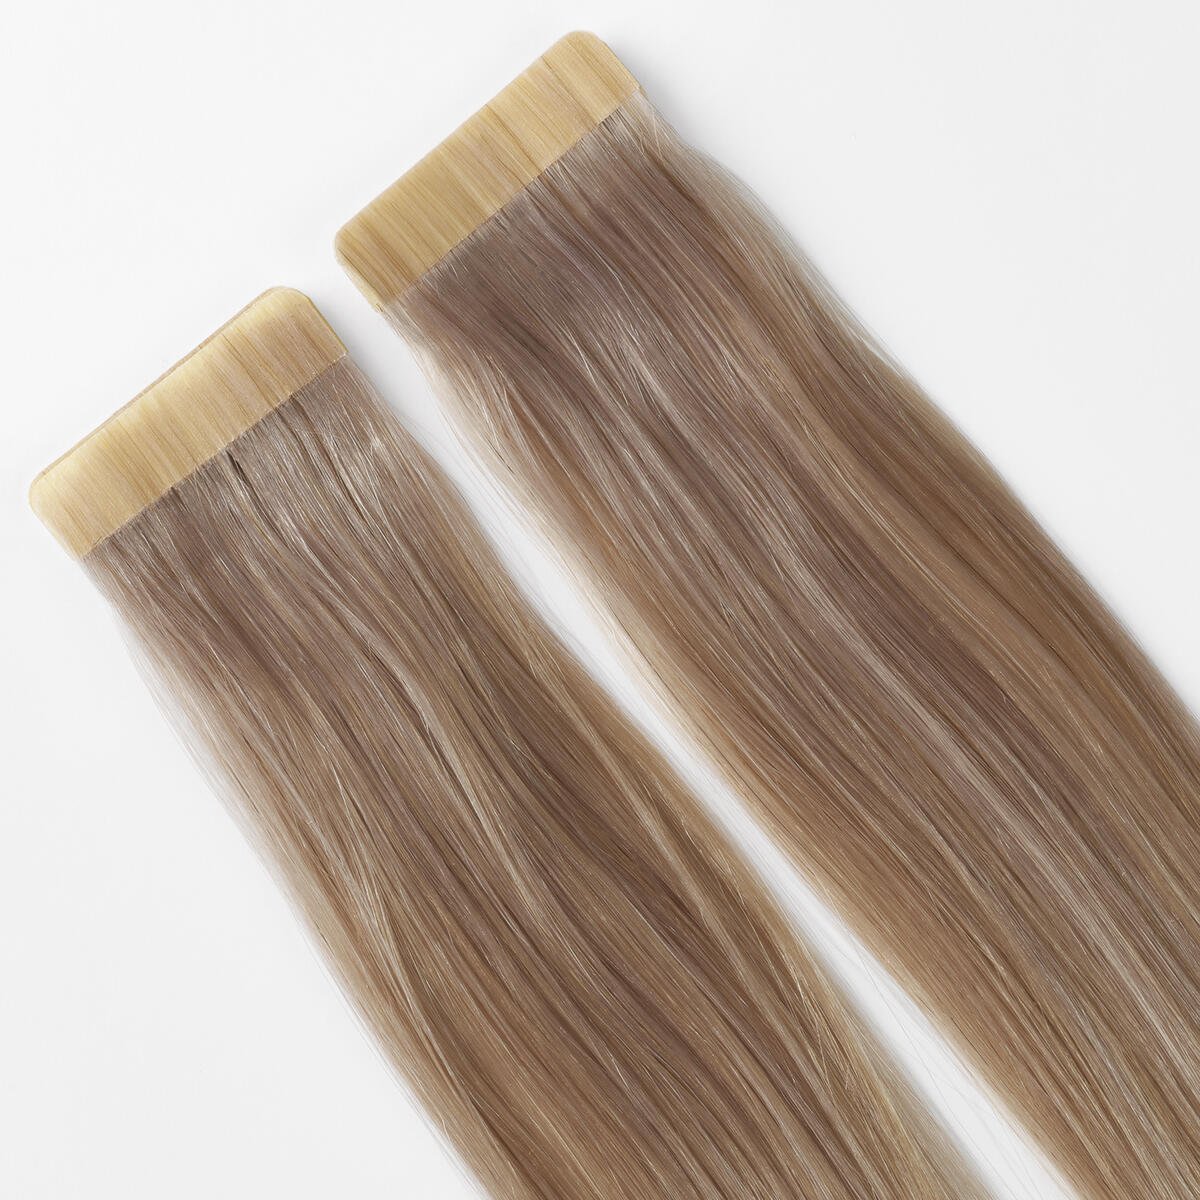 Basic Tape Extensions Classic 4 10.5 Grey 40 cm